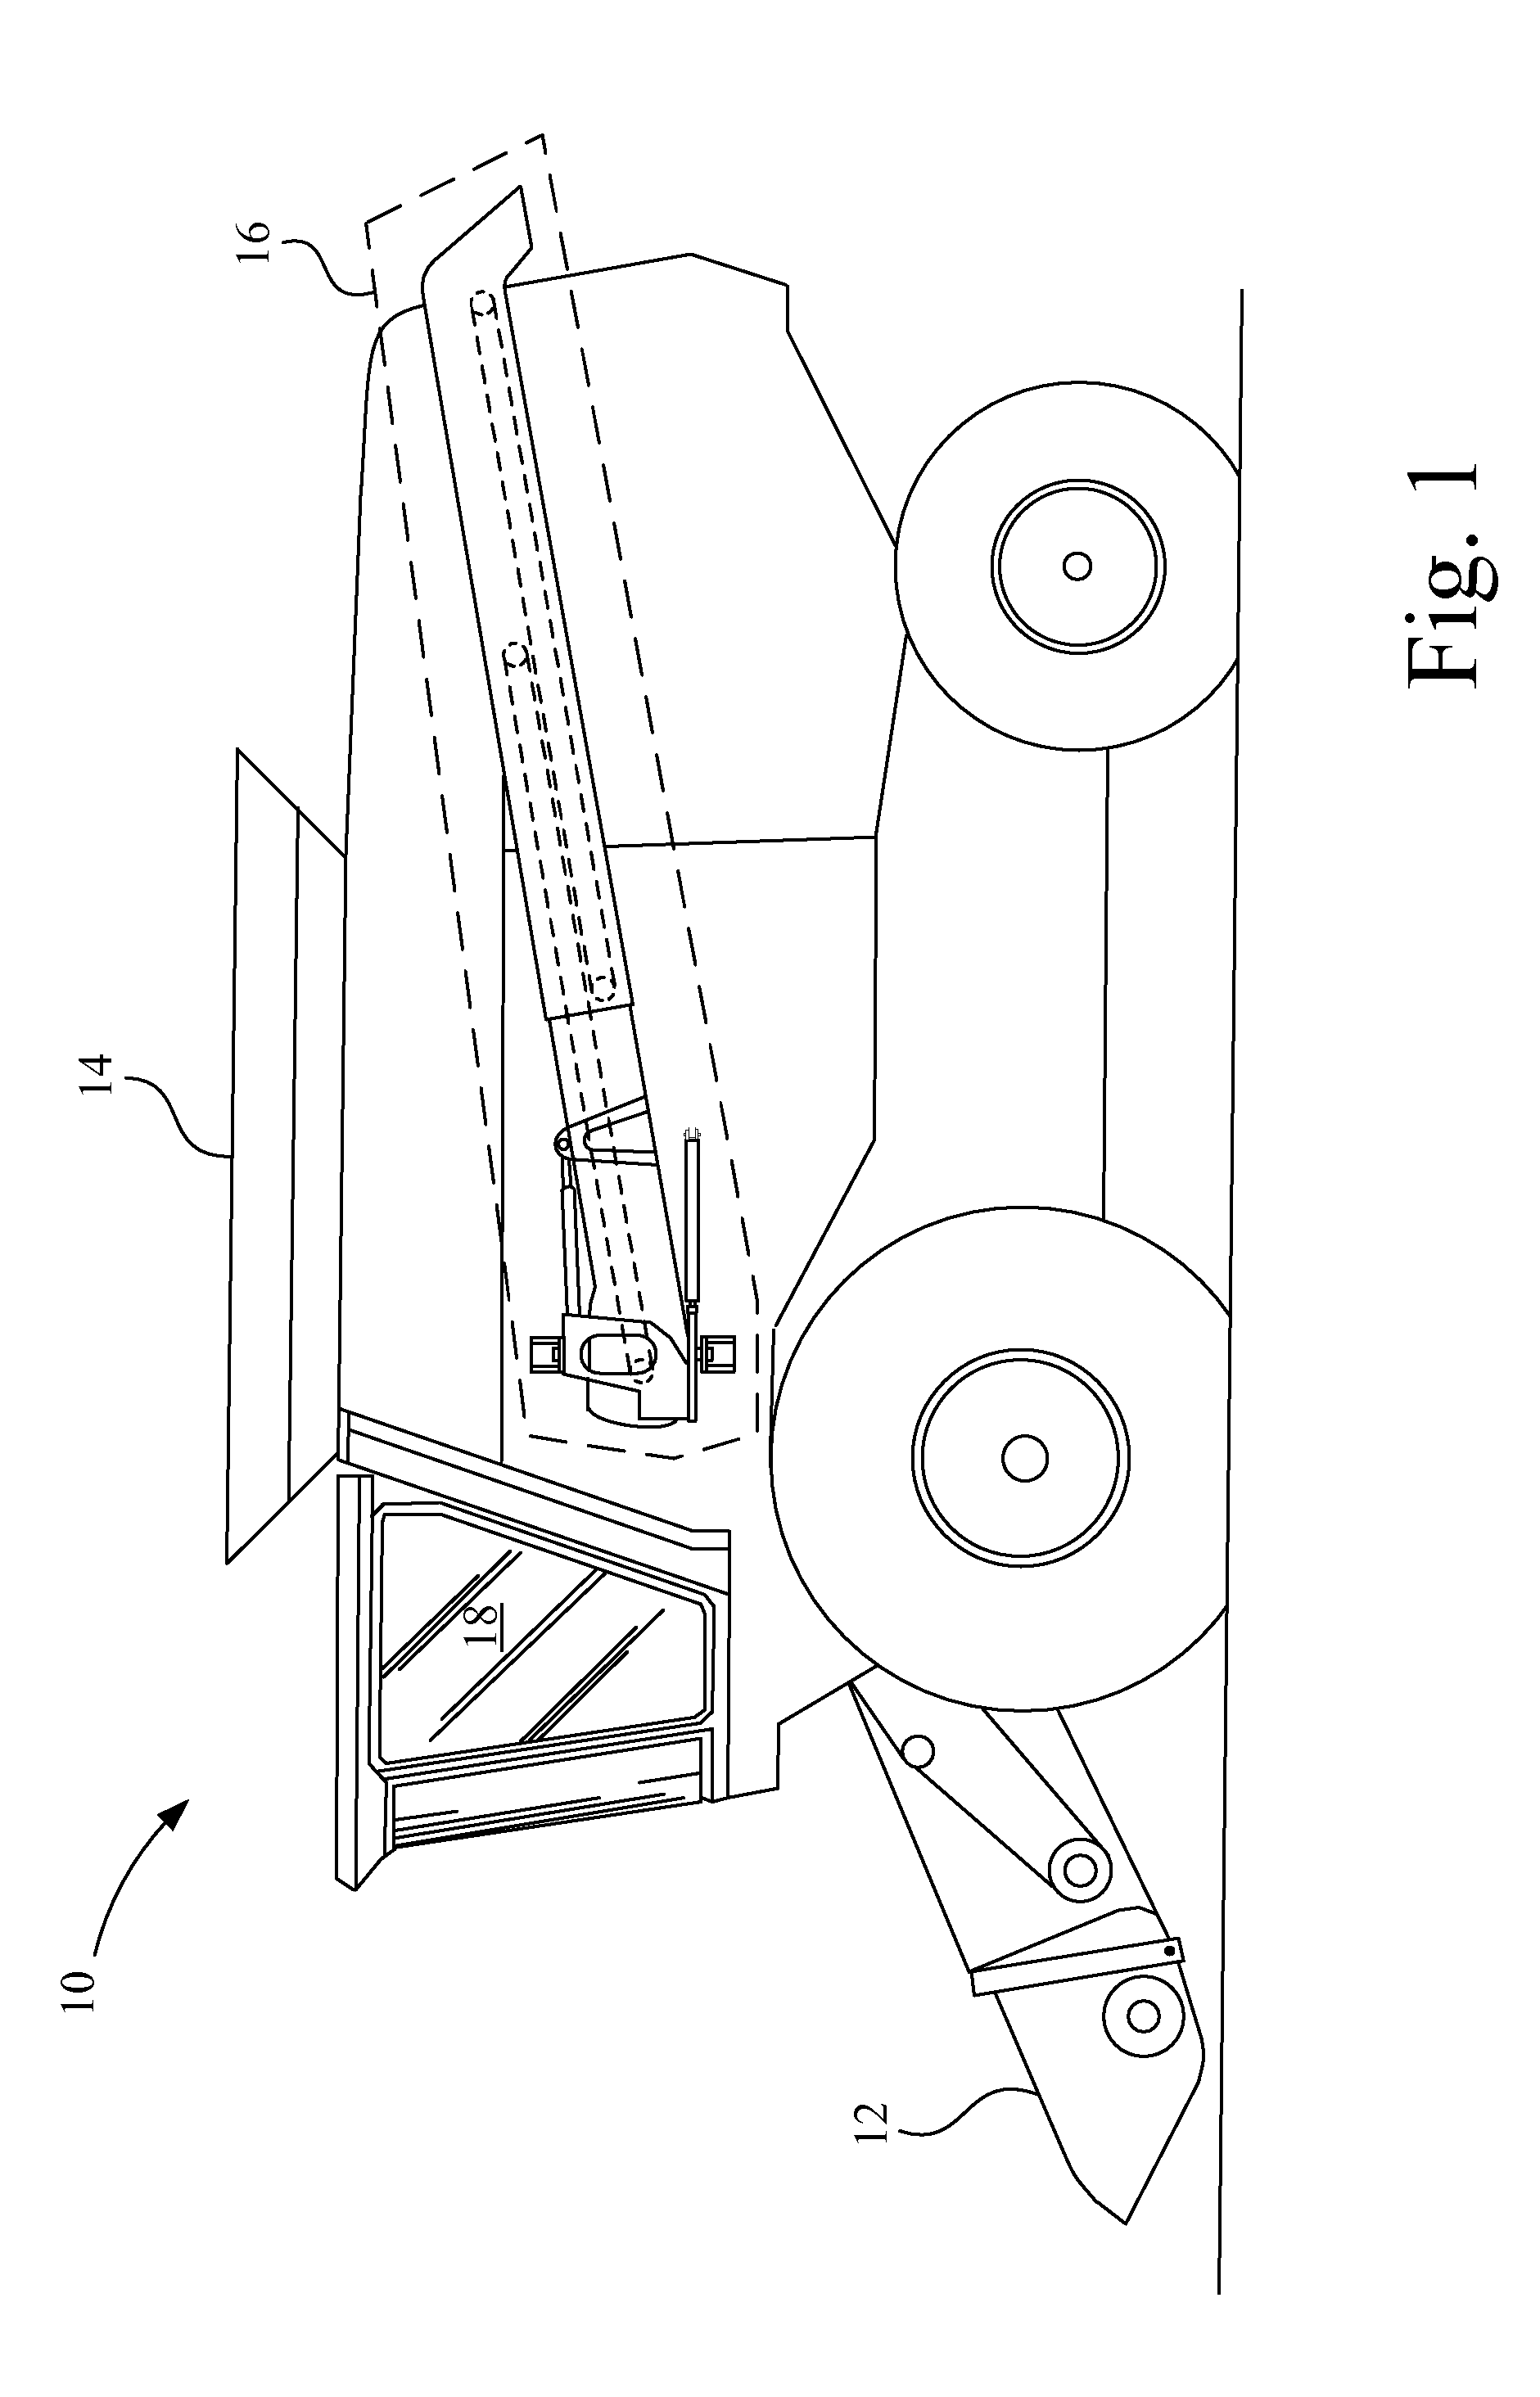 Work machine and unloading system for unloading an agricultural product from a work machine